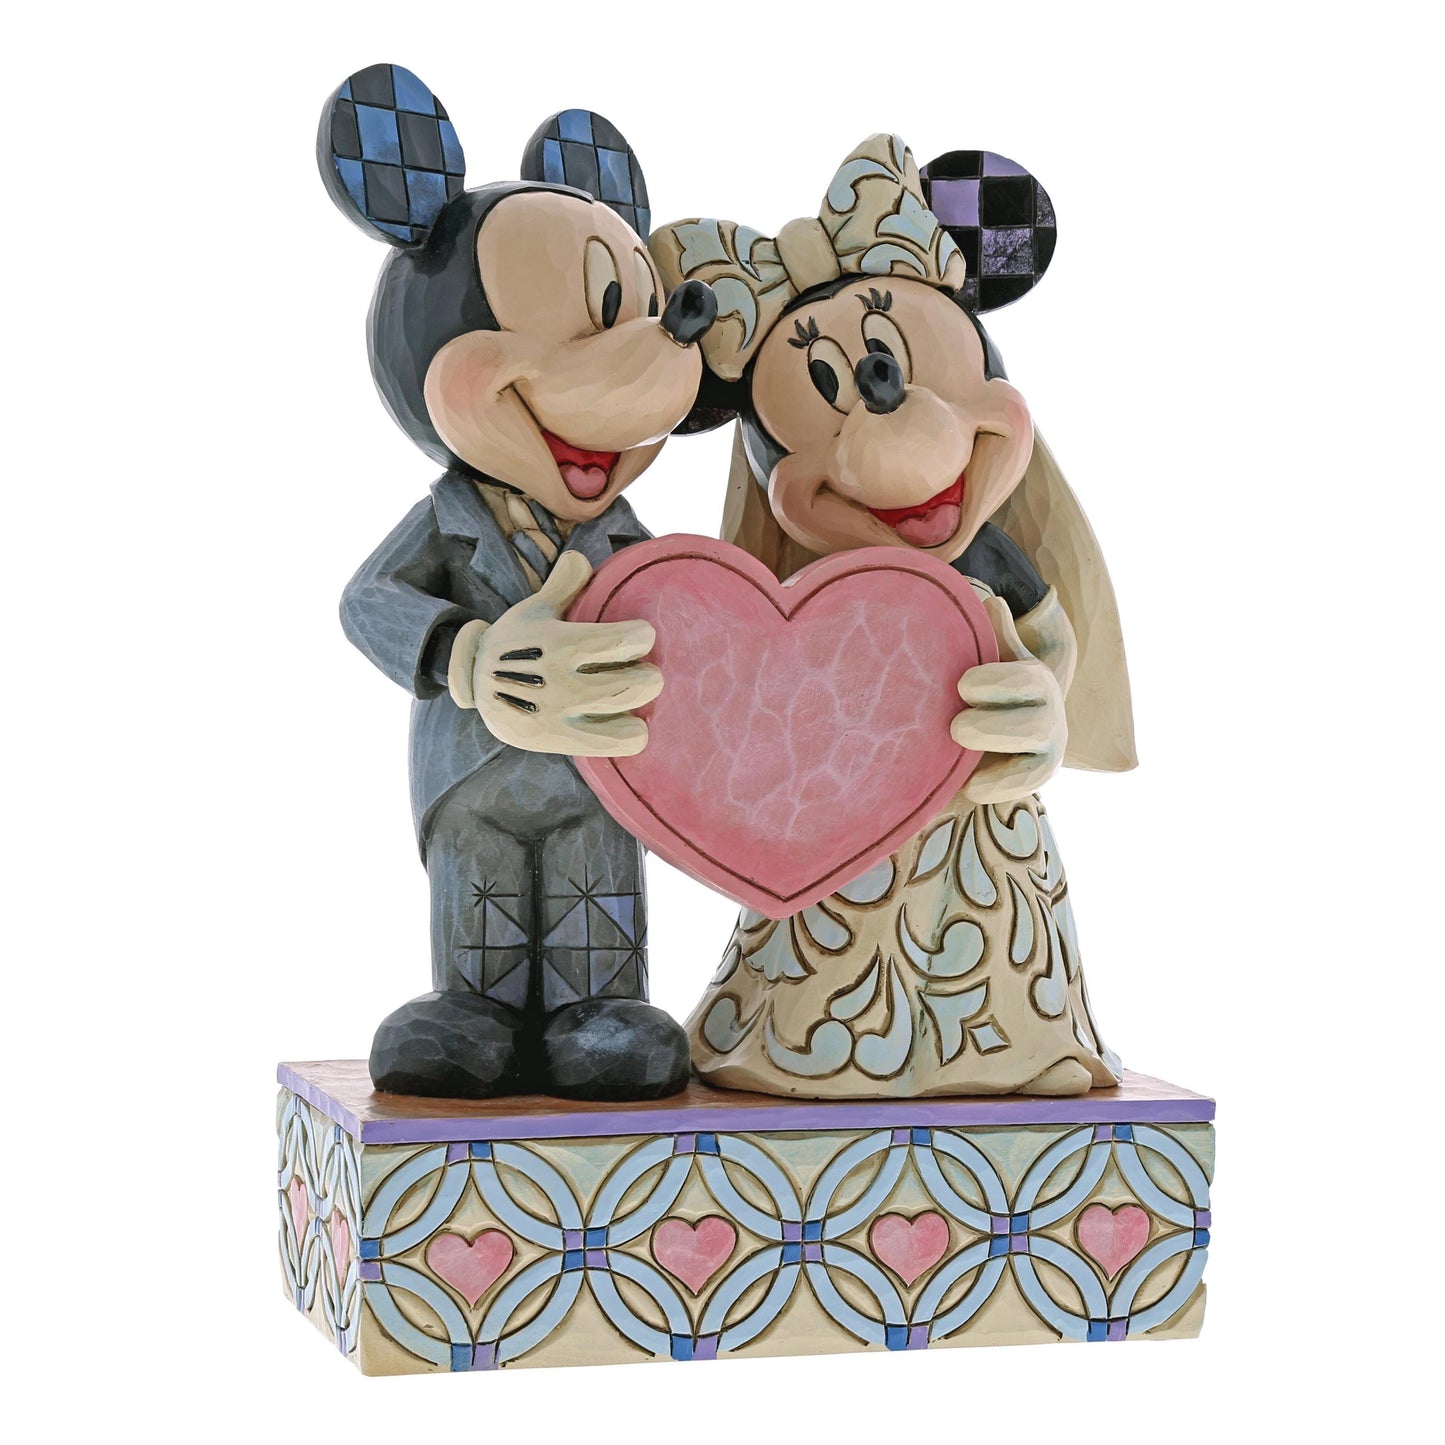 Two Souls, One Heart Wedding (Mickey and Minnie) (Disney Traditions by Jim Shore) - Gallery Gifts Online 